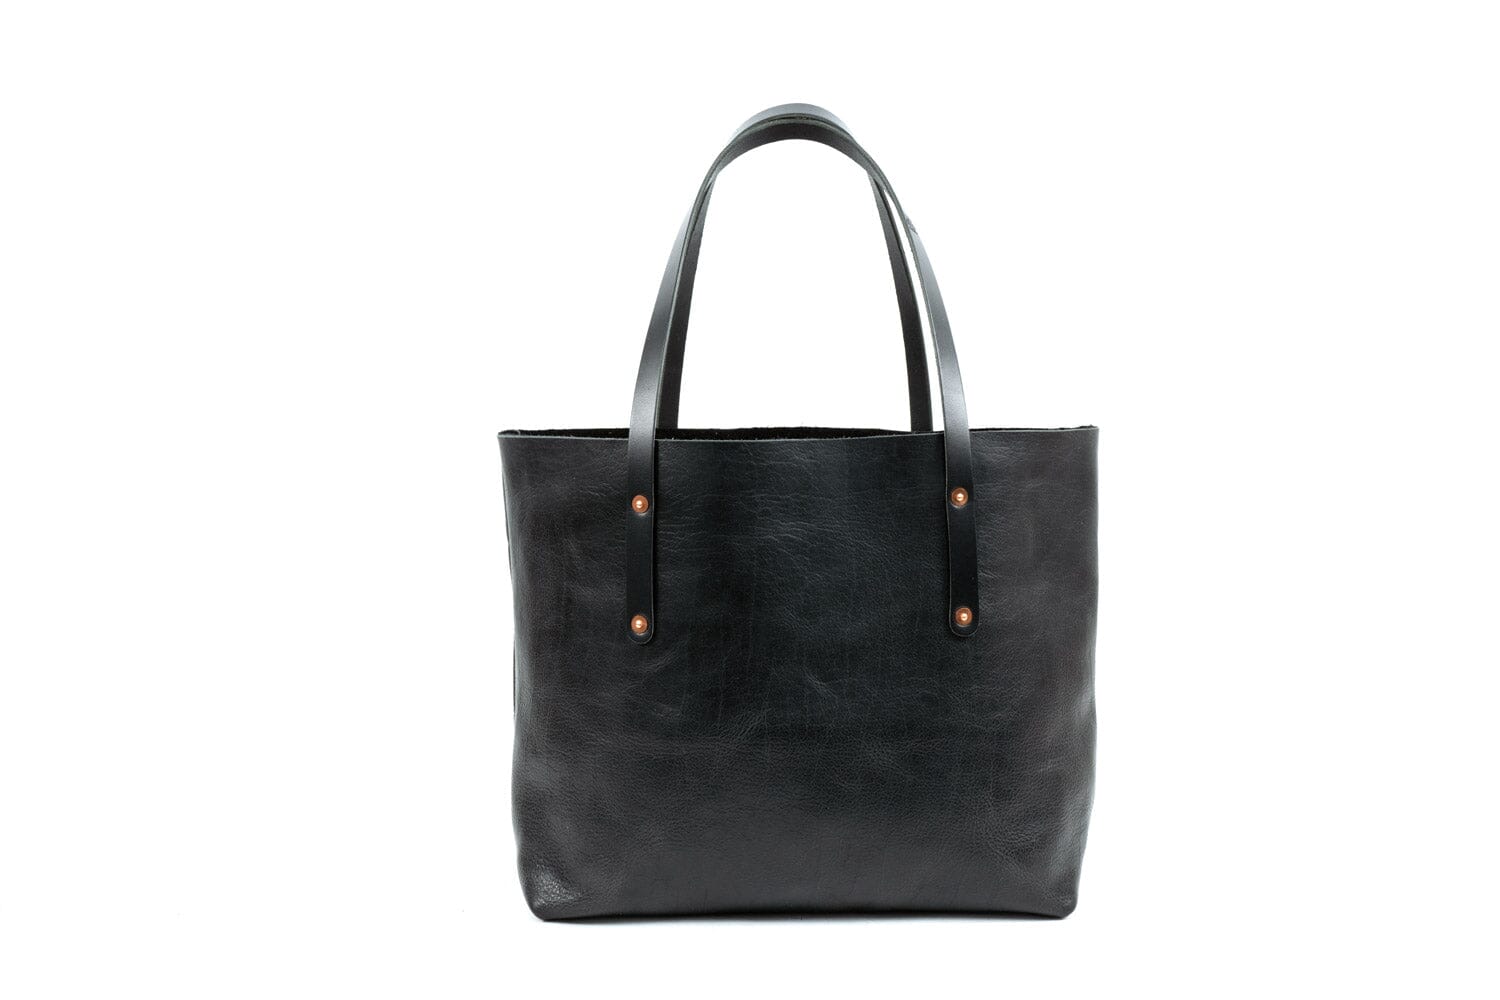 AVERY LEATHER TOTE BAG - LARGE - BLACK BISON